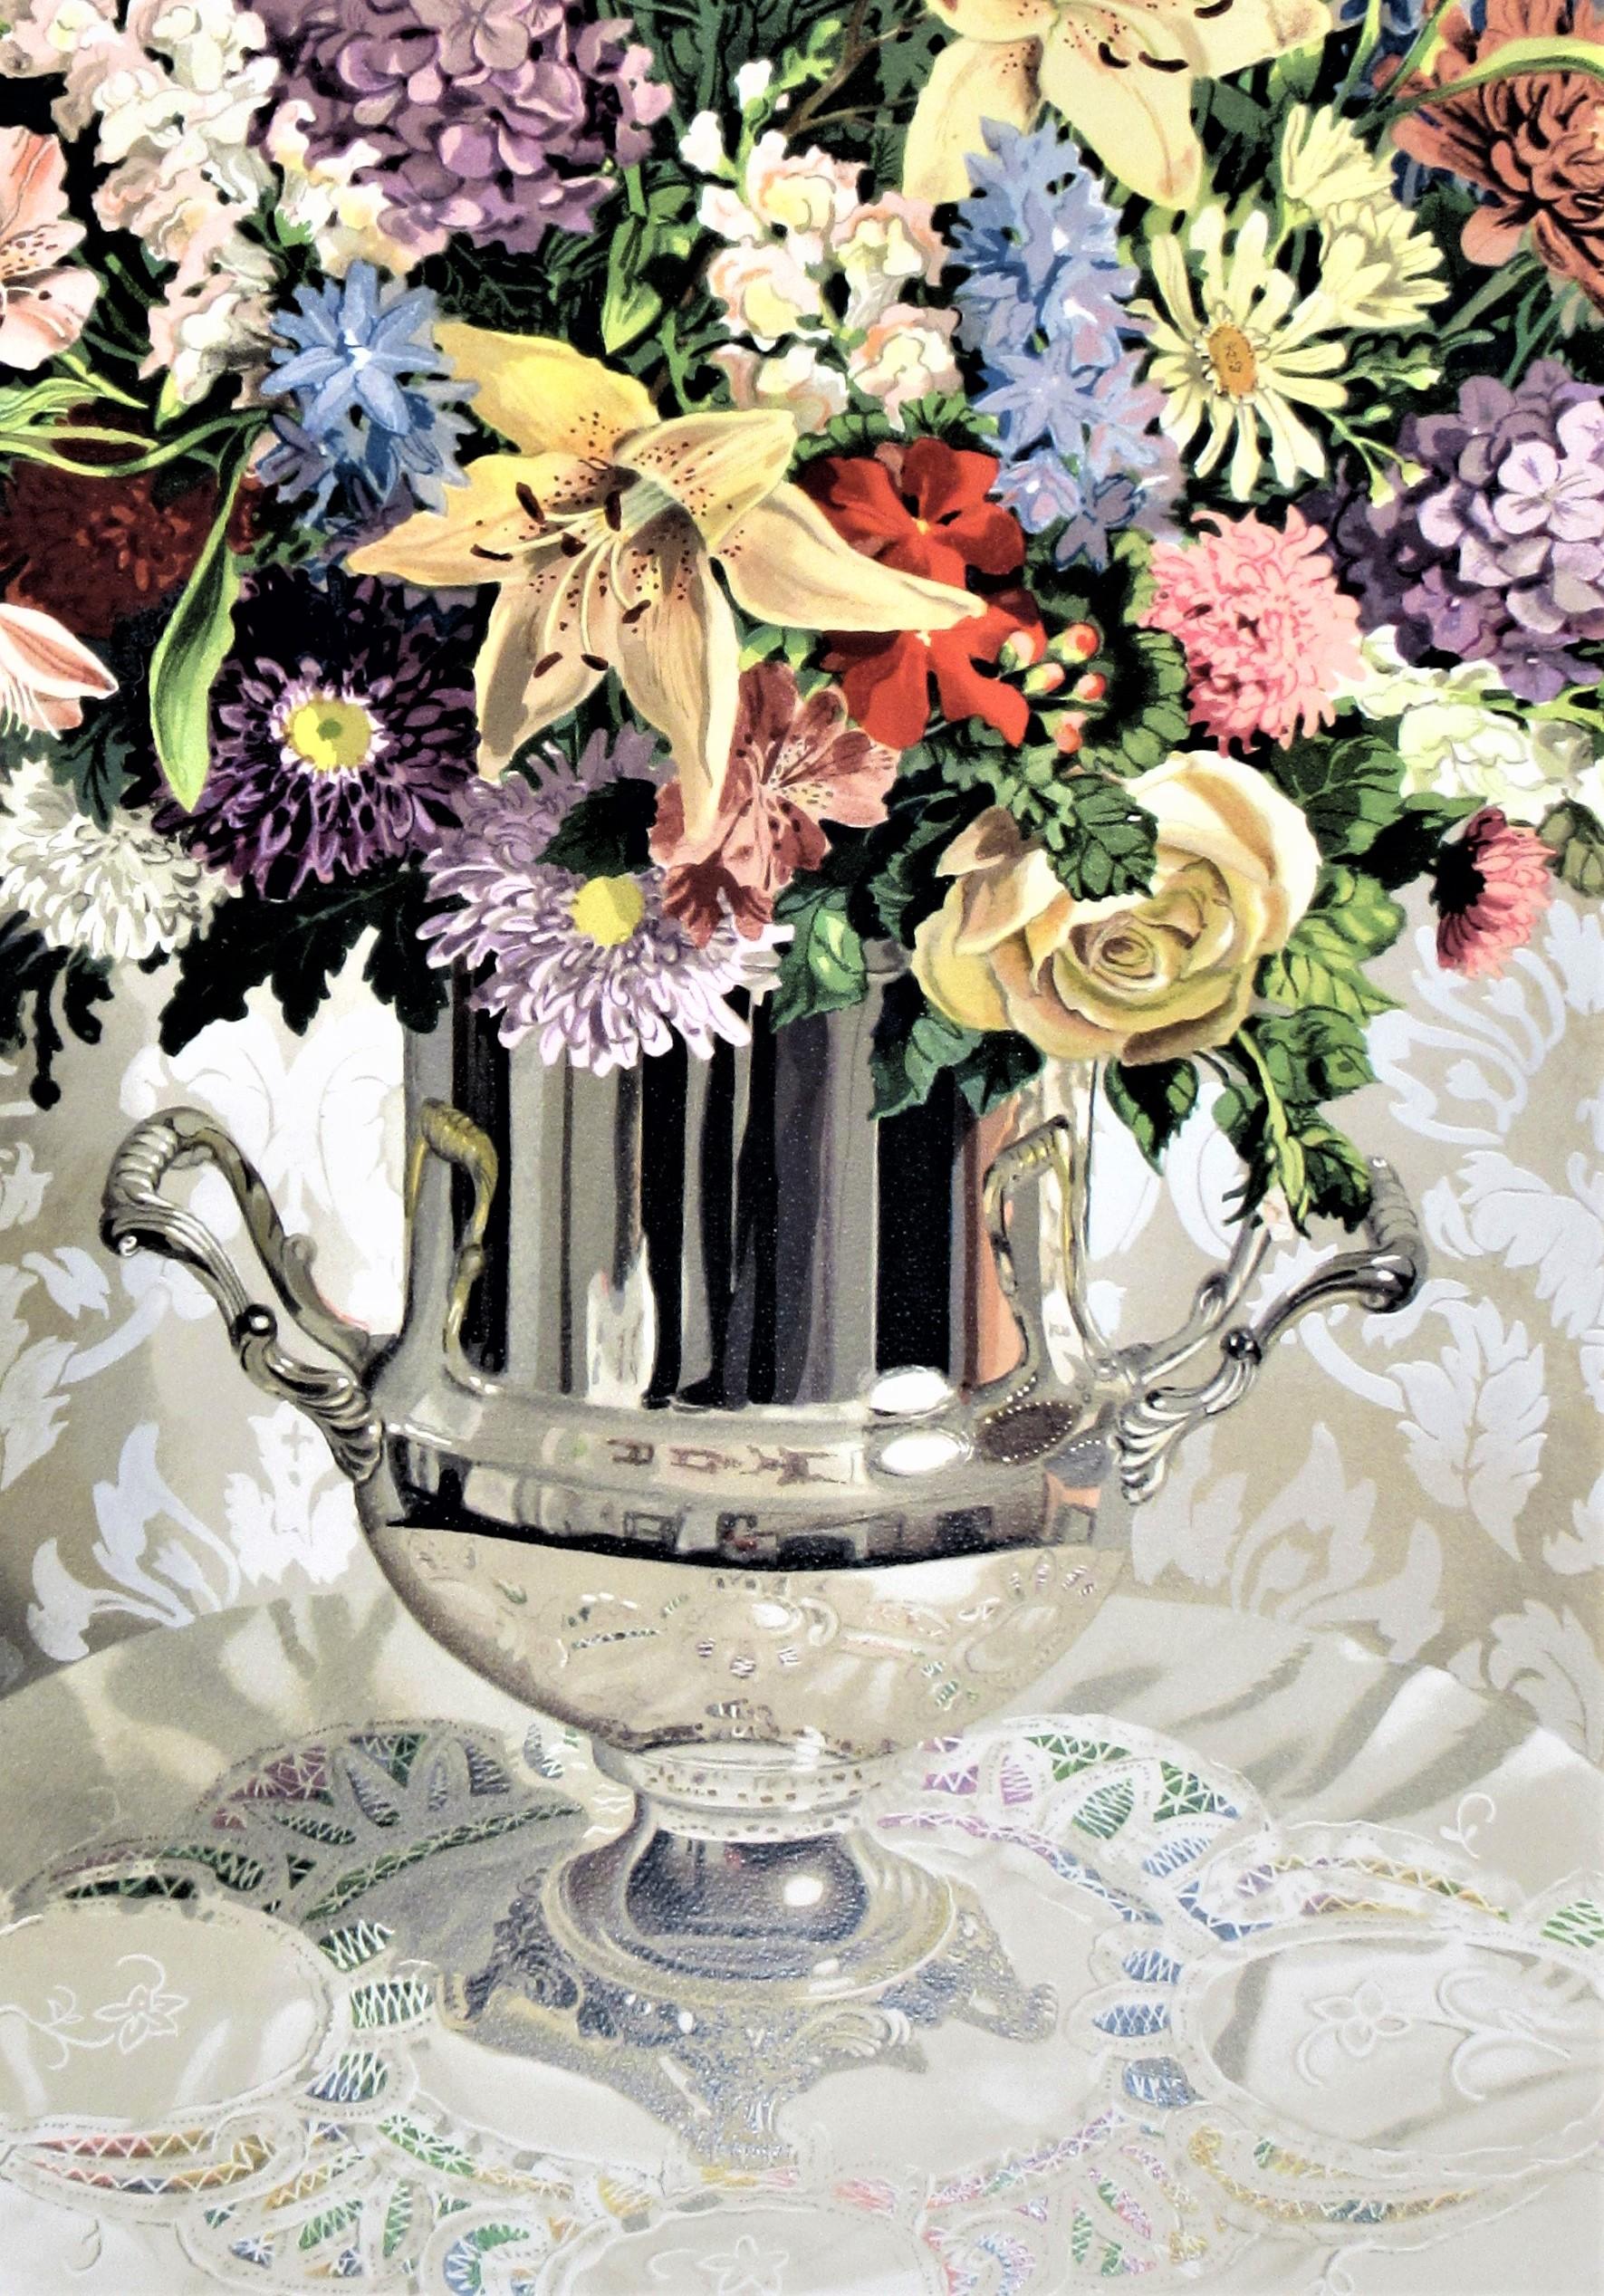 Still Life with Silver Vase, large color serigraph - American Realist Print by Audean Johnson